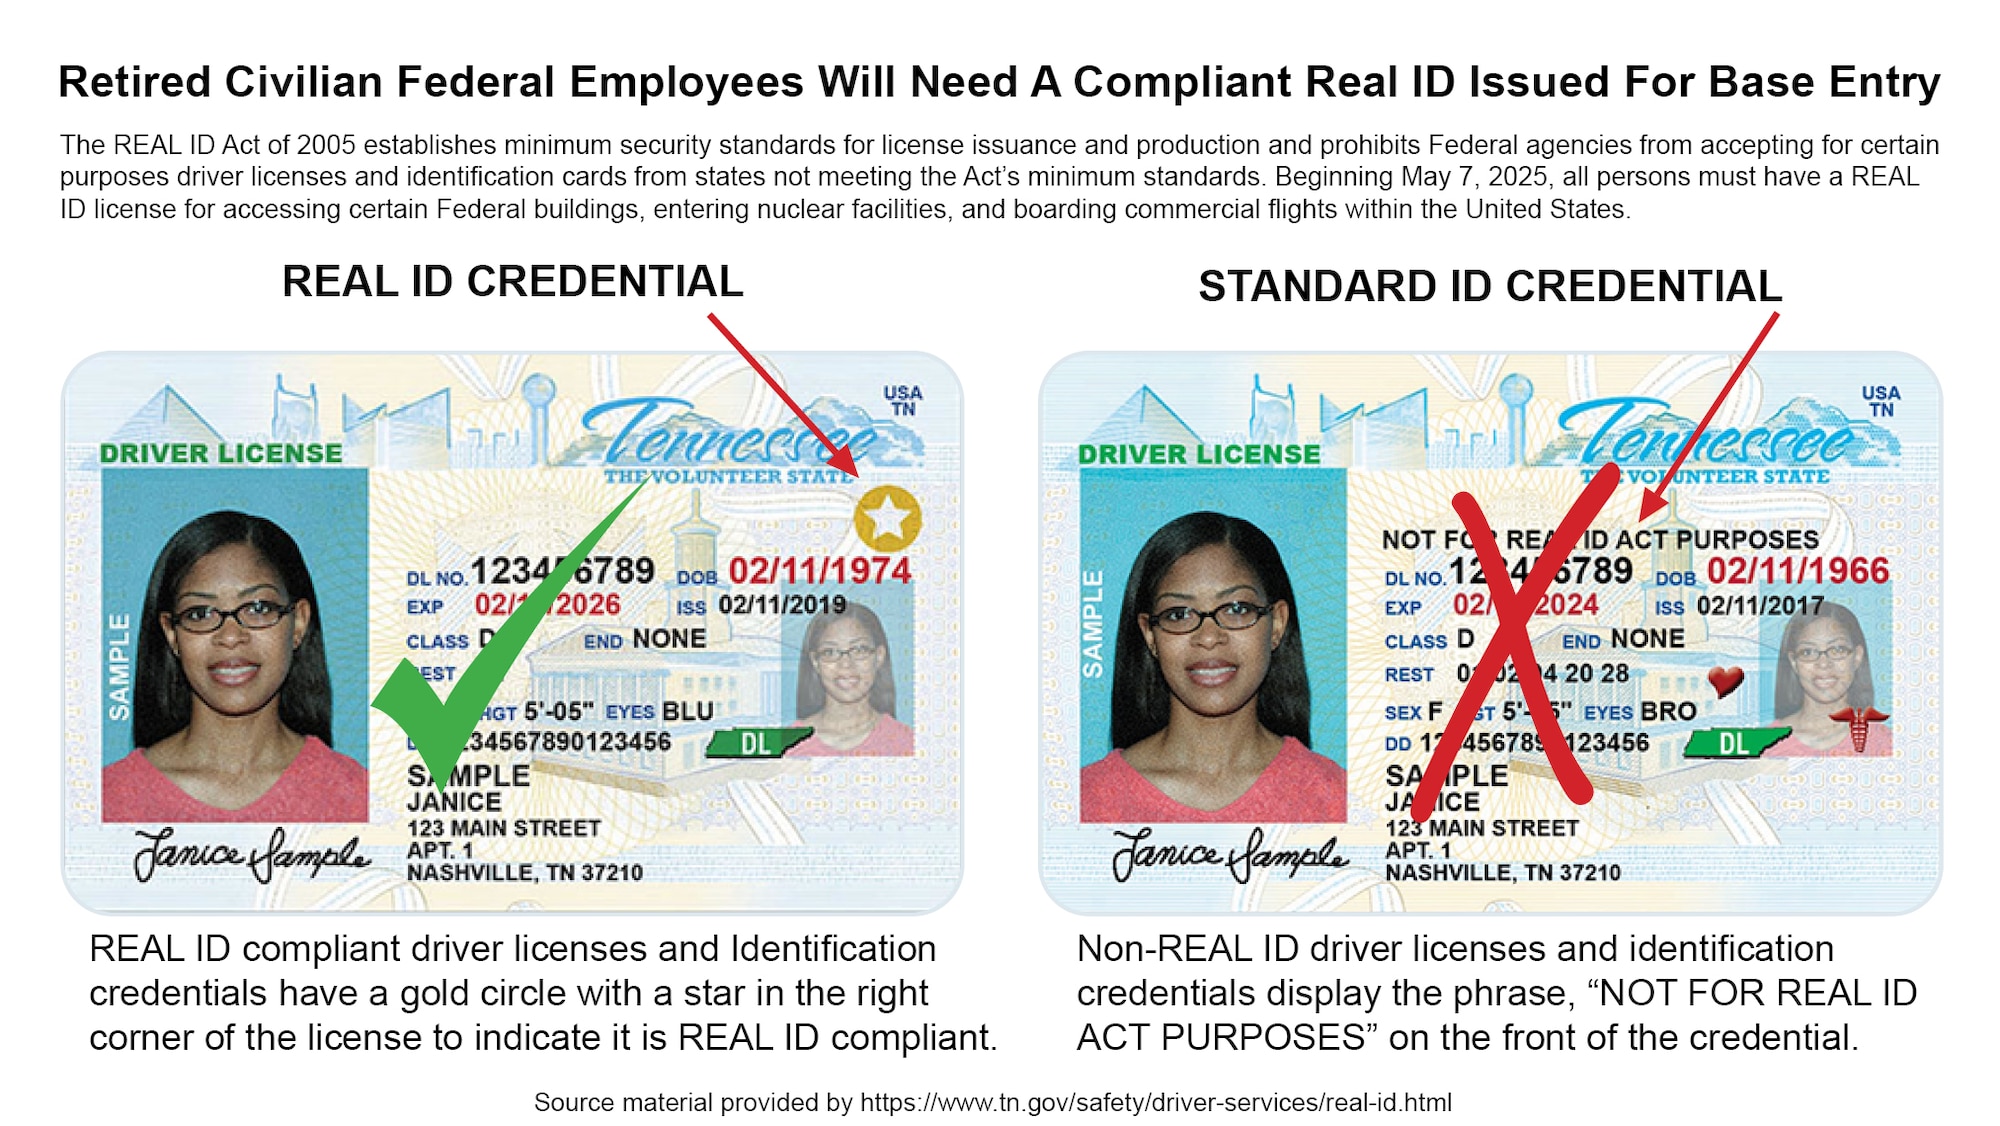 Check out Florida's new driver's licenses and ID cards 